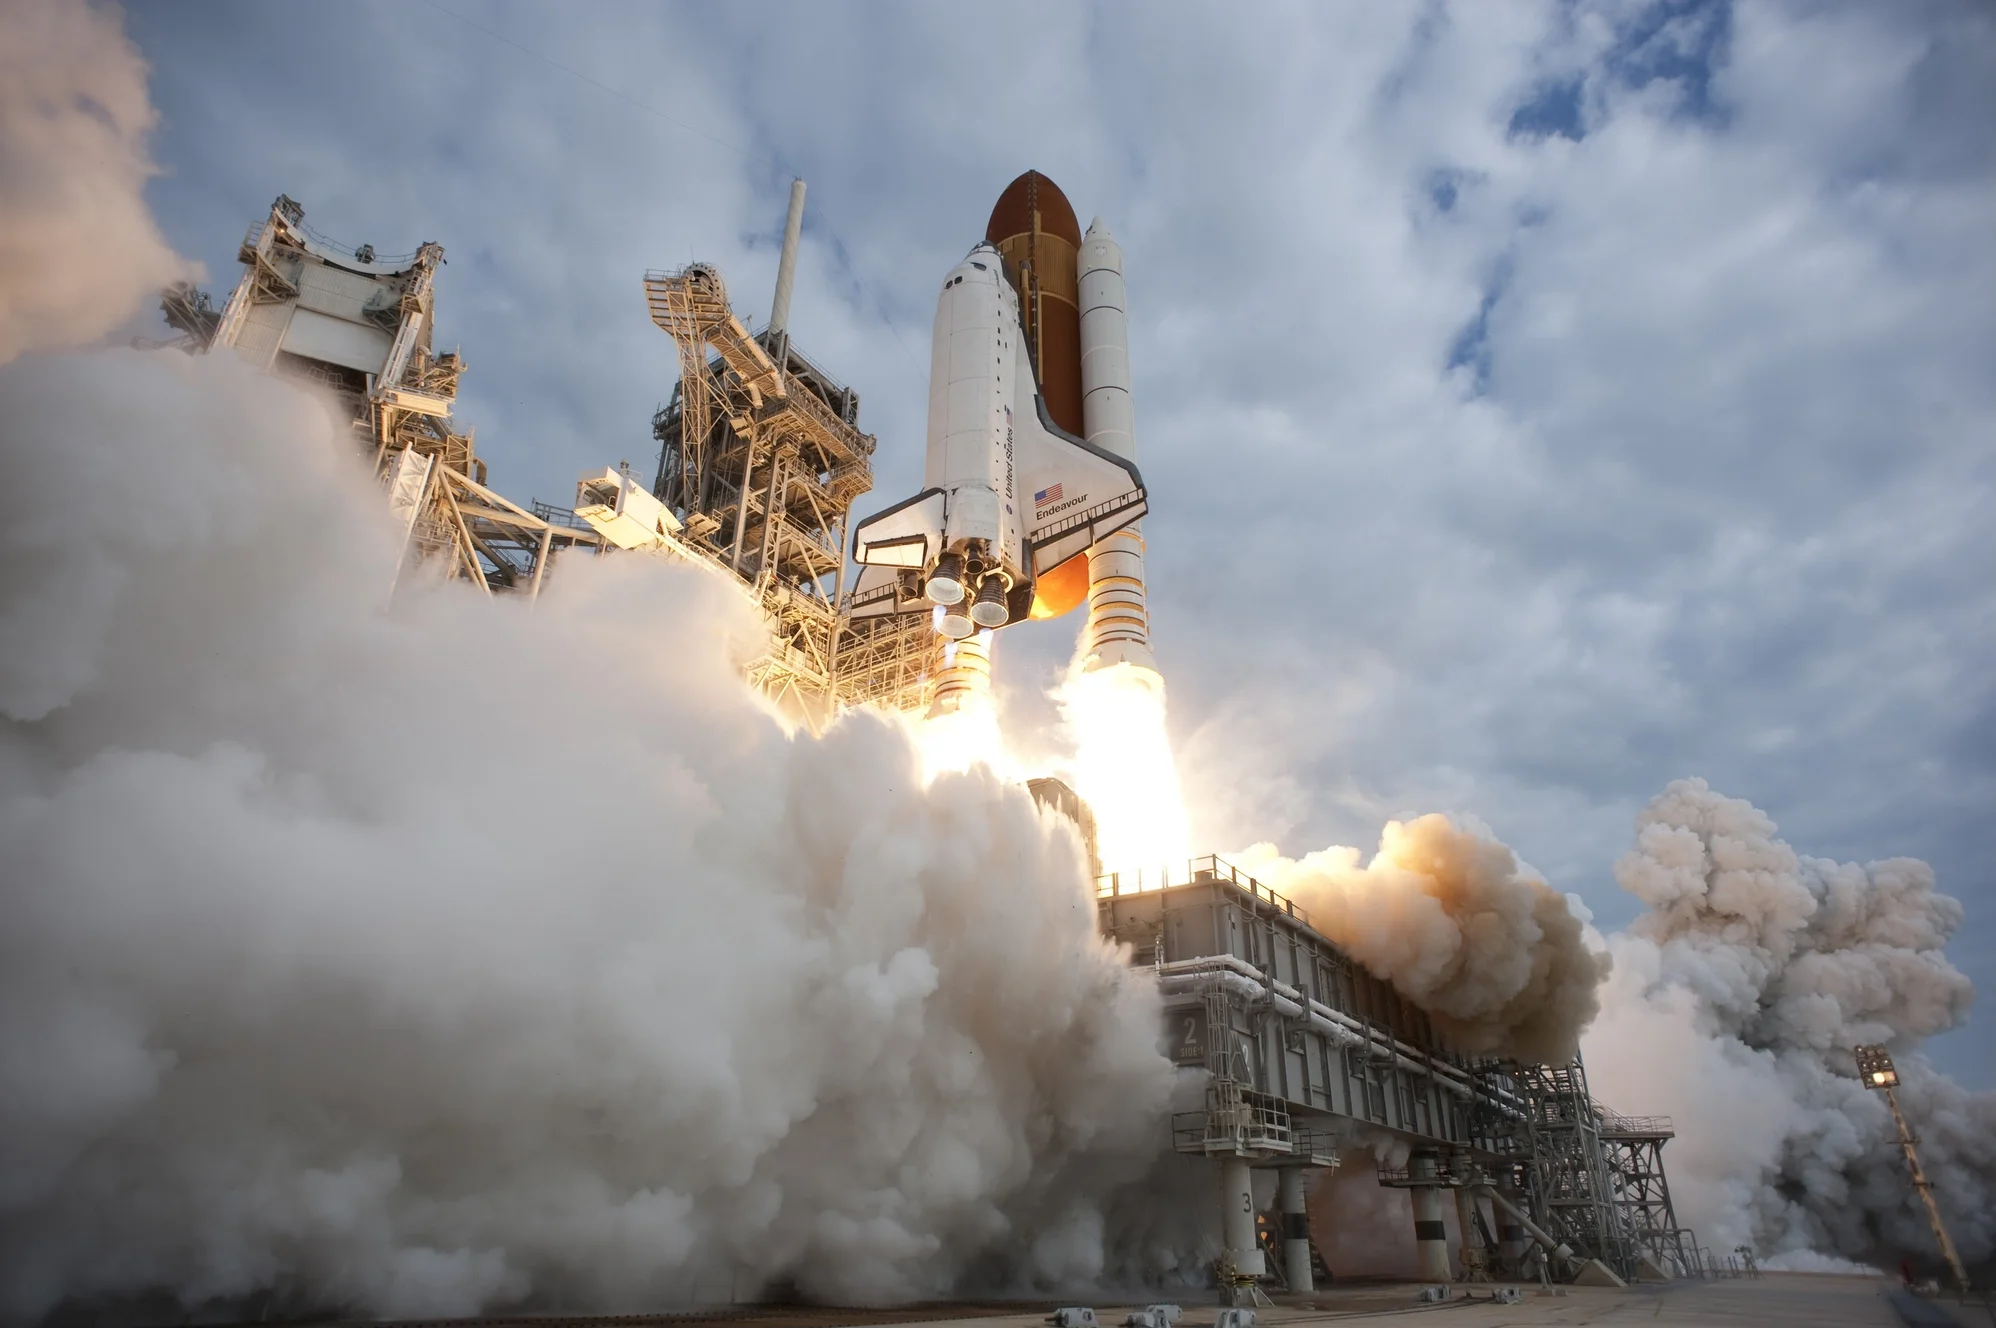 Space shuttle Endeavour rises on twin columns of flame from Launch Pad 39A at NASA's Kennedy Space Center in Florida on the STS-134 mission to the International Space Station.